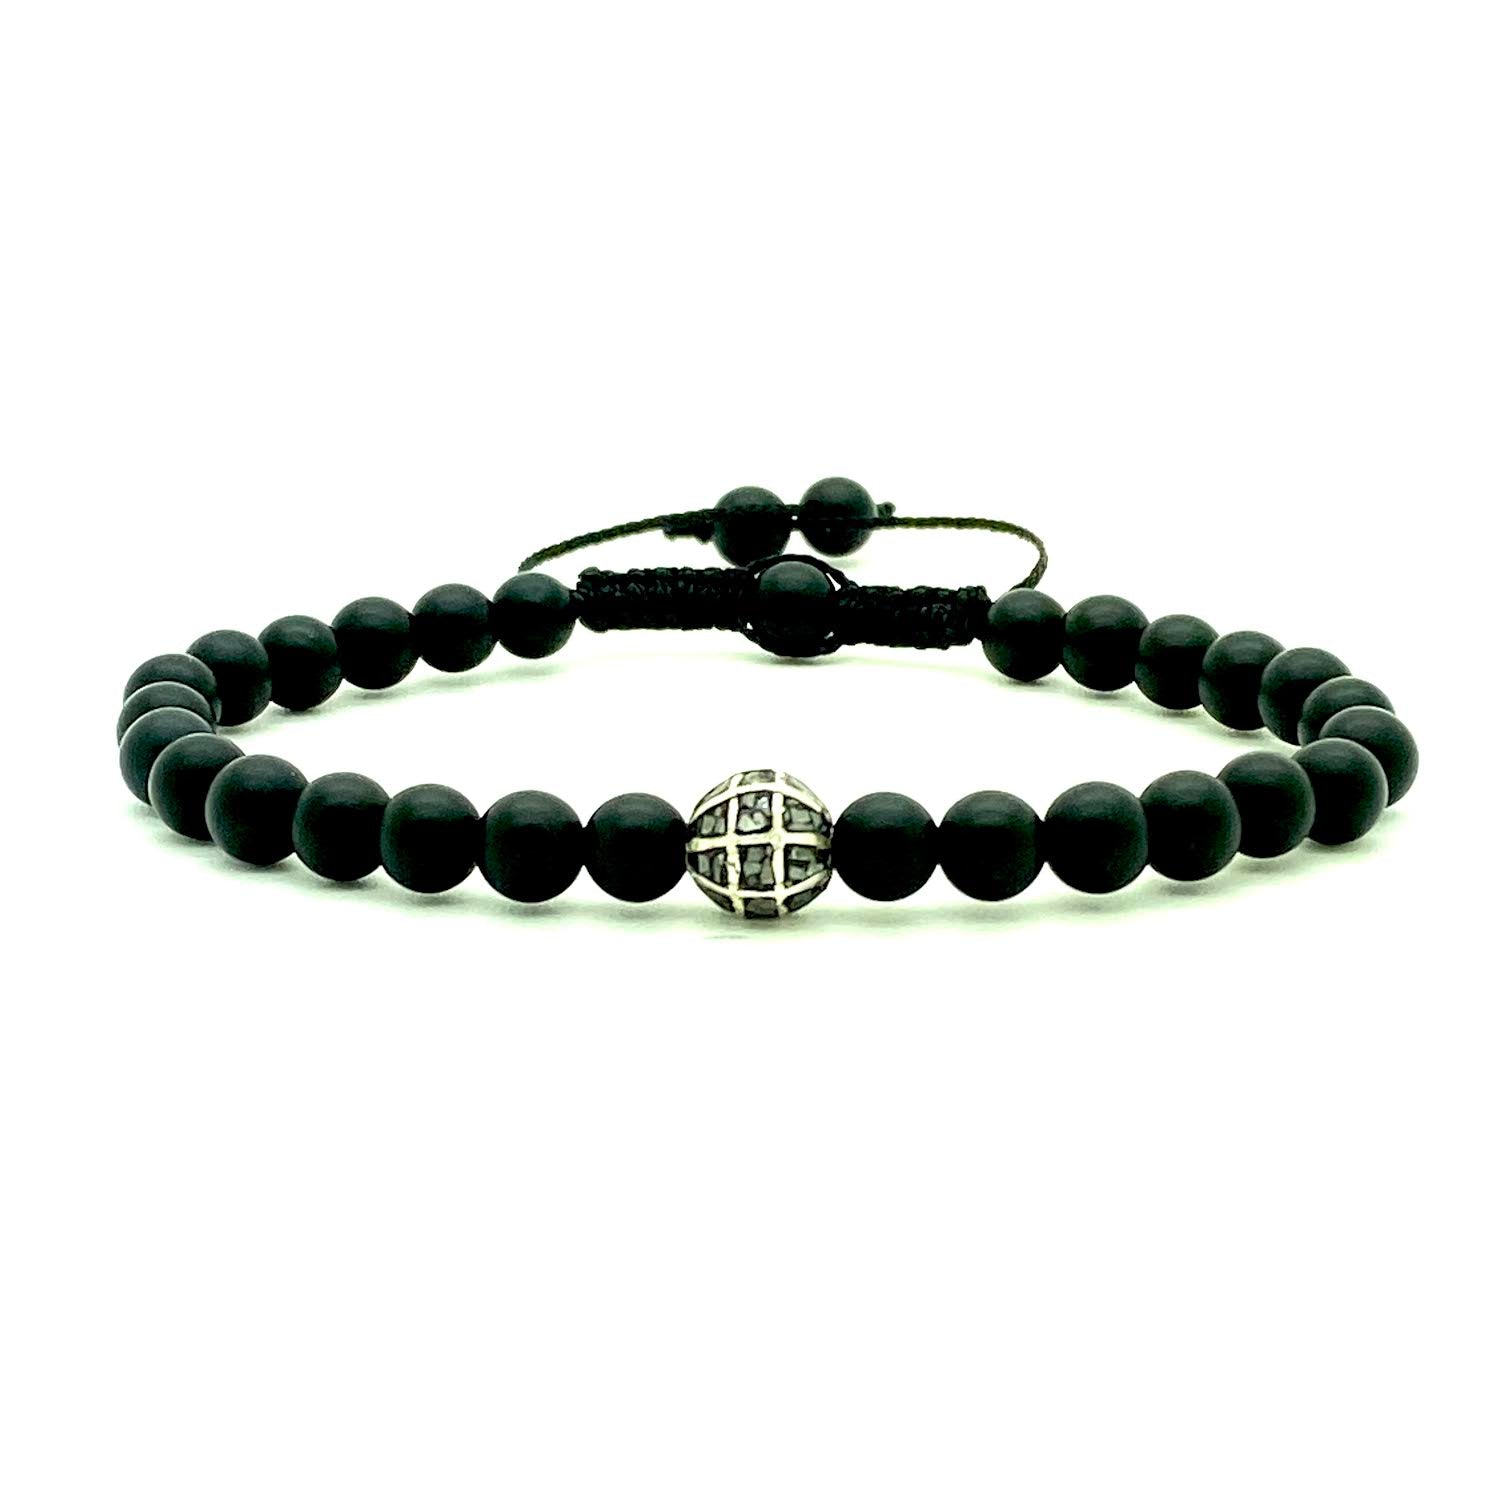 This popular matte onyx beaded bracelet is accented with a single black diamond chip bead for a cool, confident look. Hand knotted adjustable cord for a perfect fit. Made by WristBend